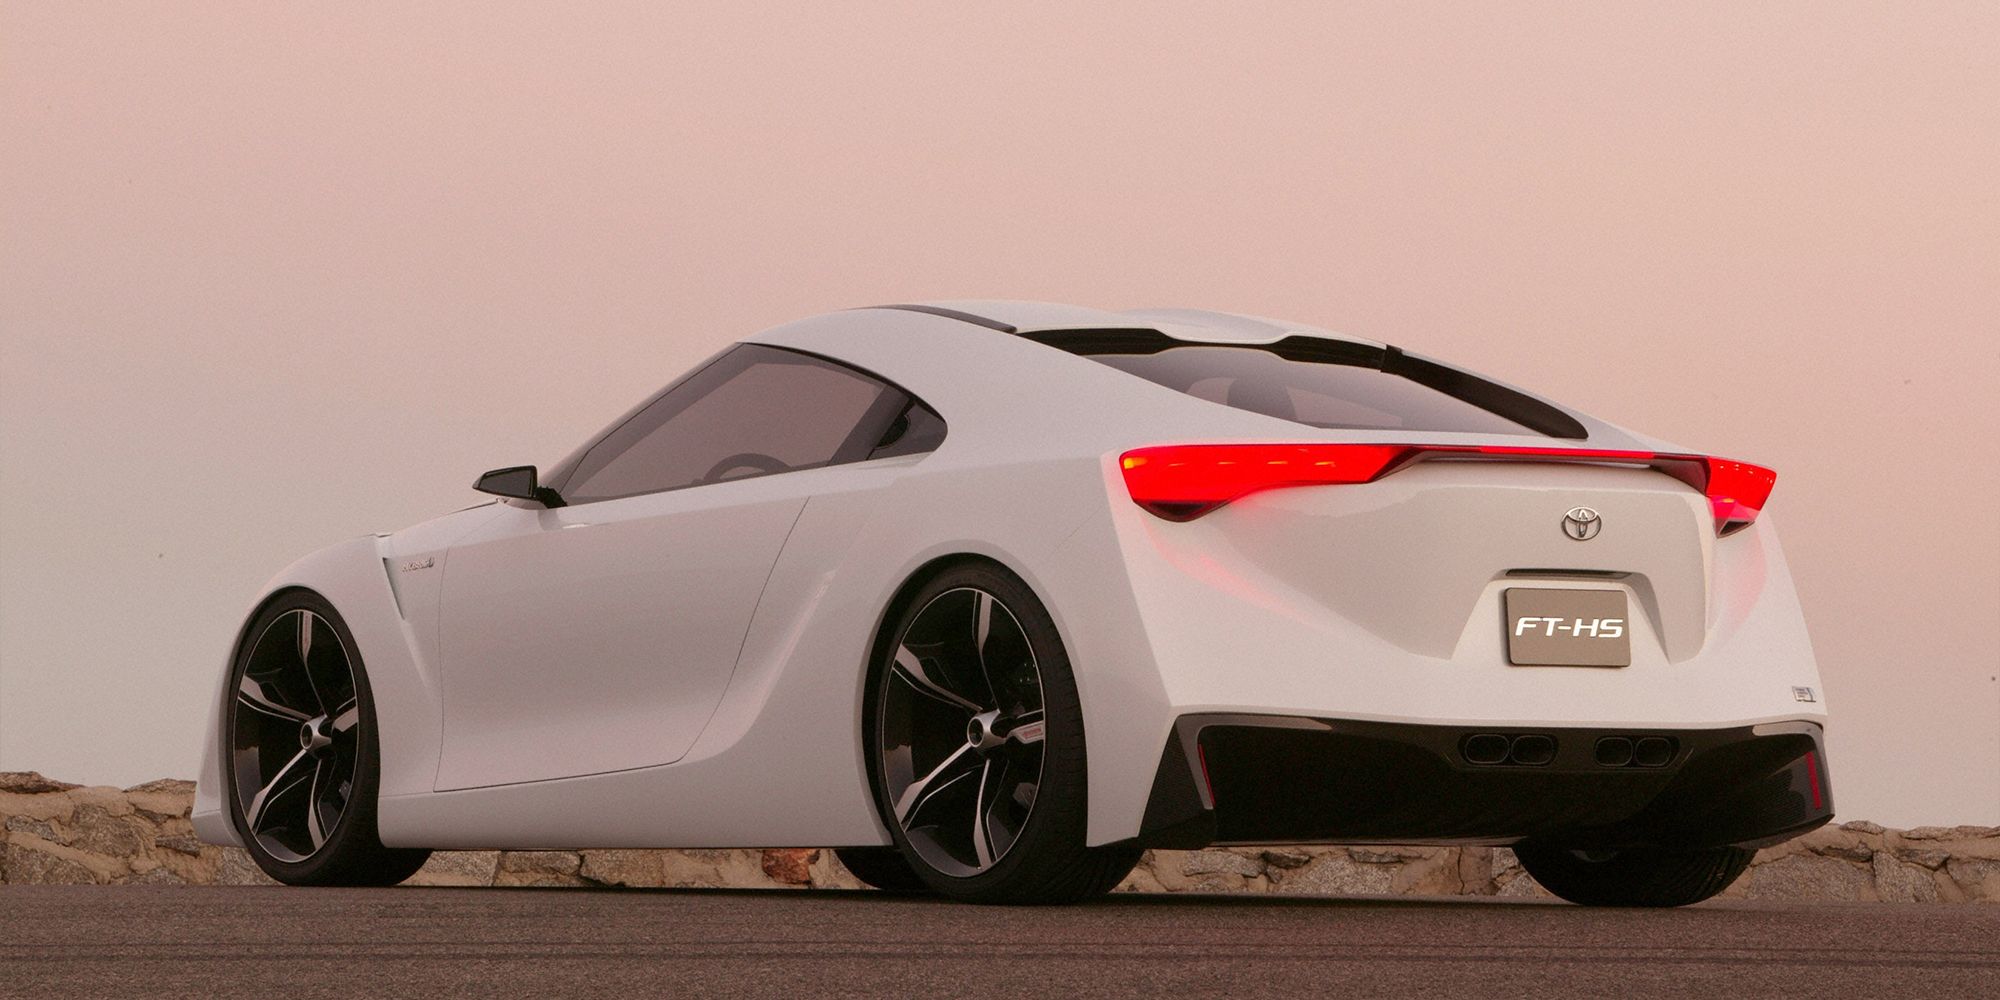 The rear of the FT-HS Concept